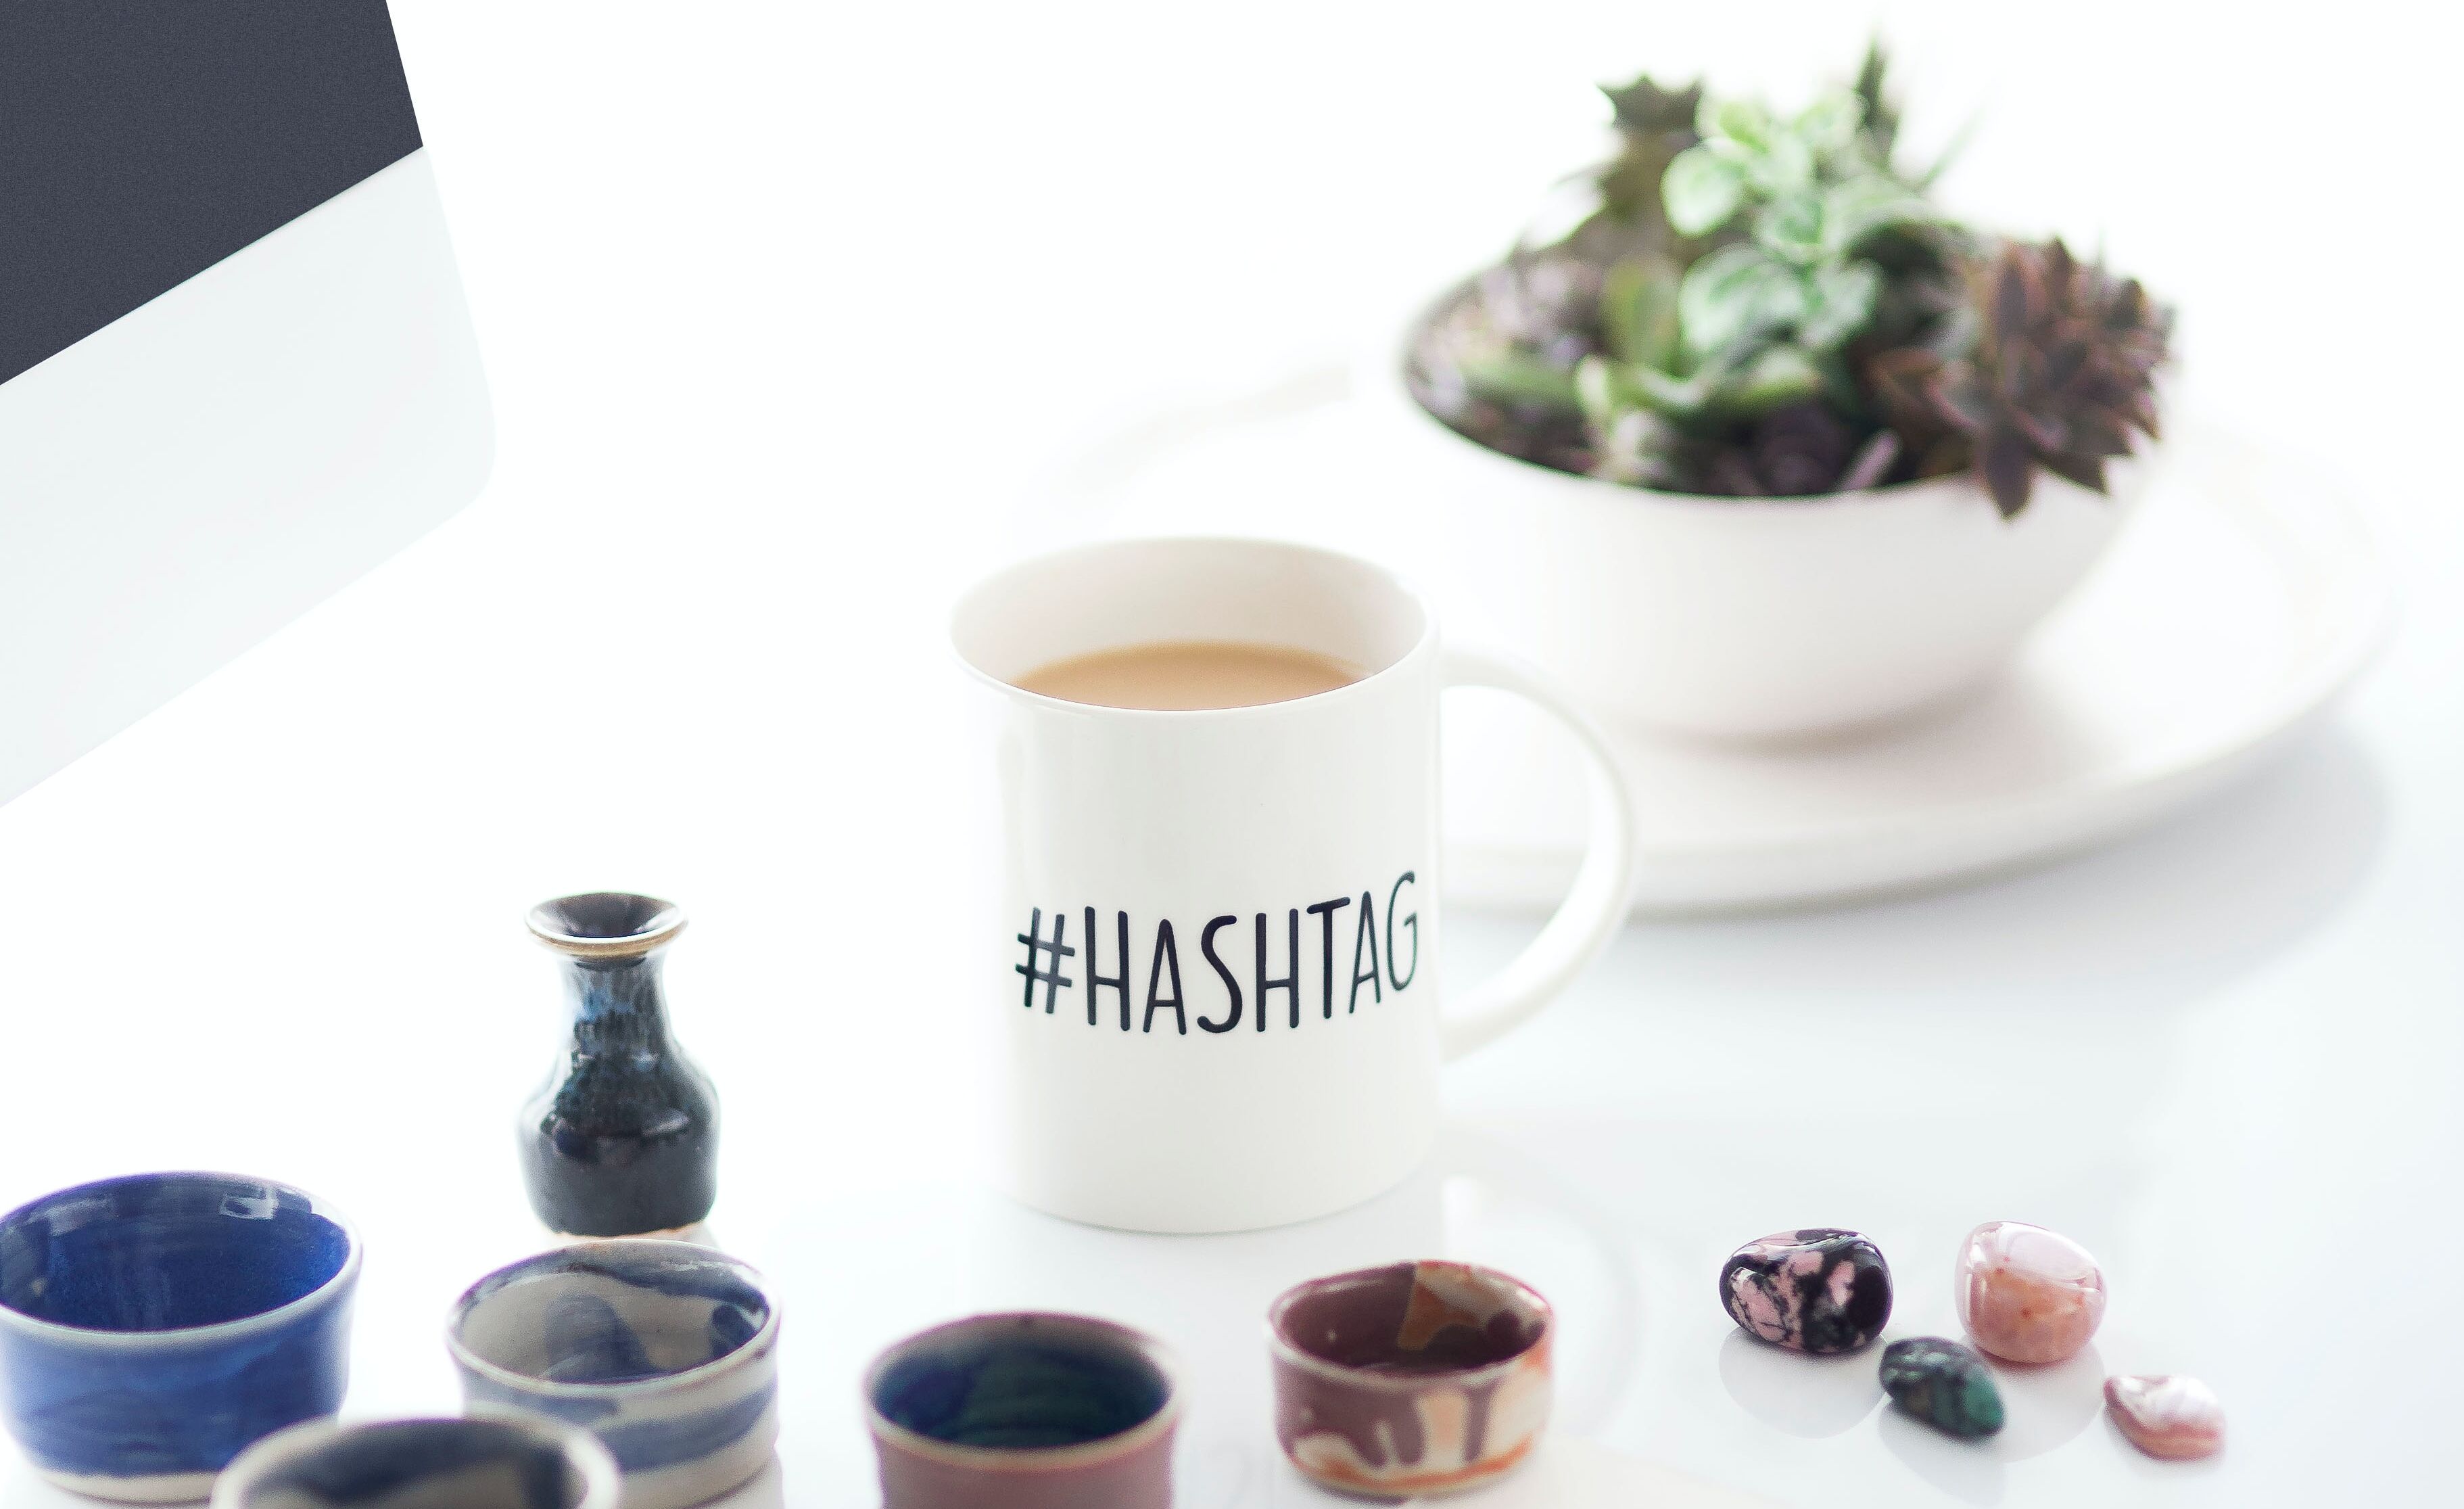 The History of the Hashtag